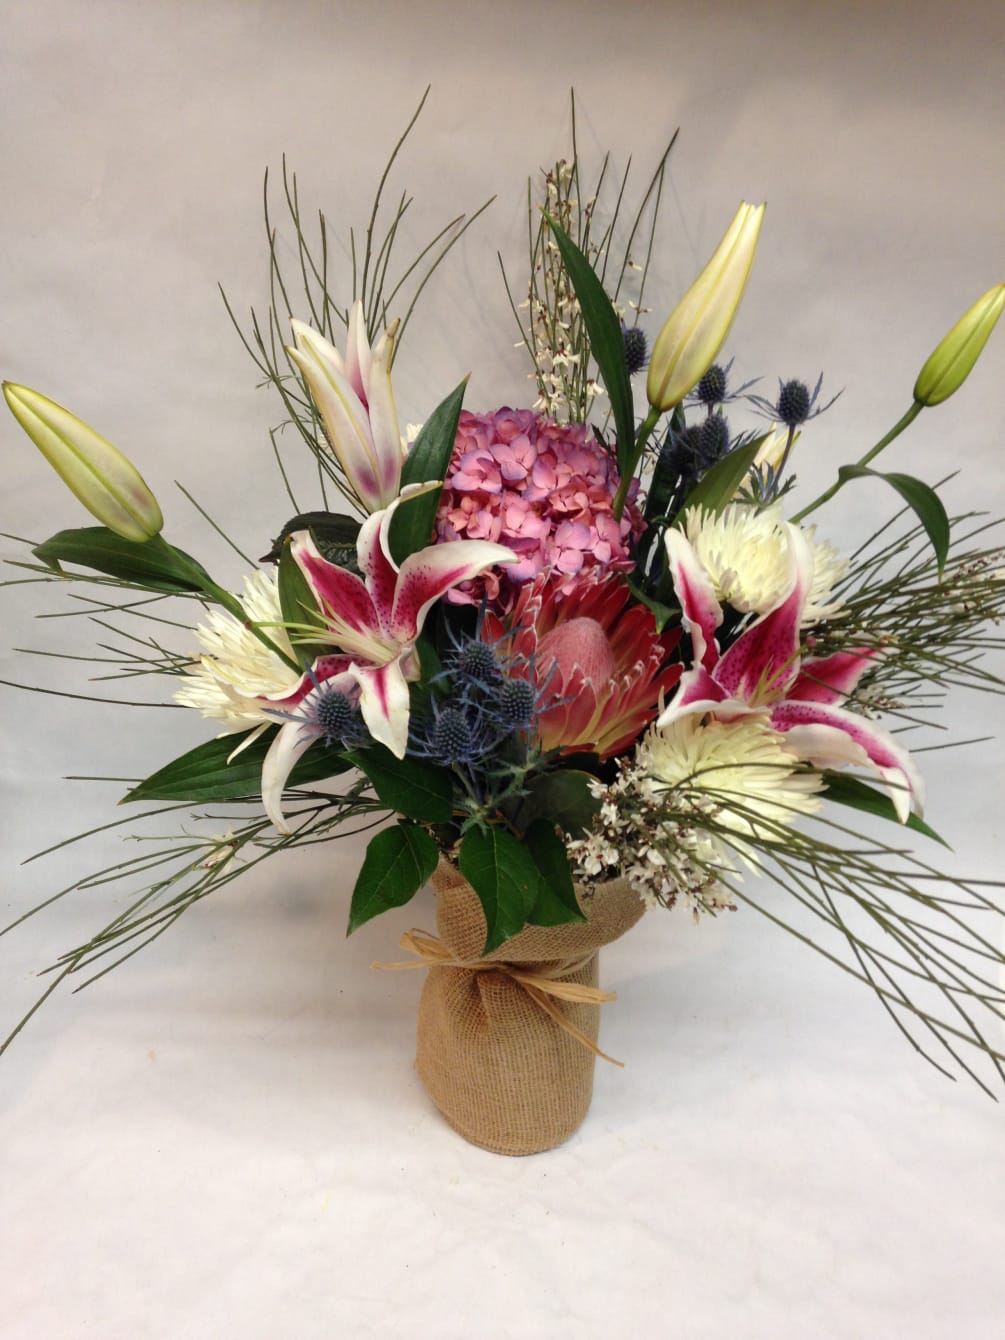 This arrangement comes complete with stargazer lilies, blue sea thistle, spider mums